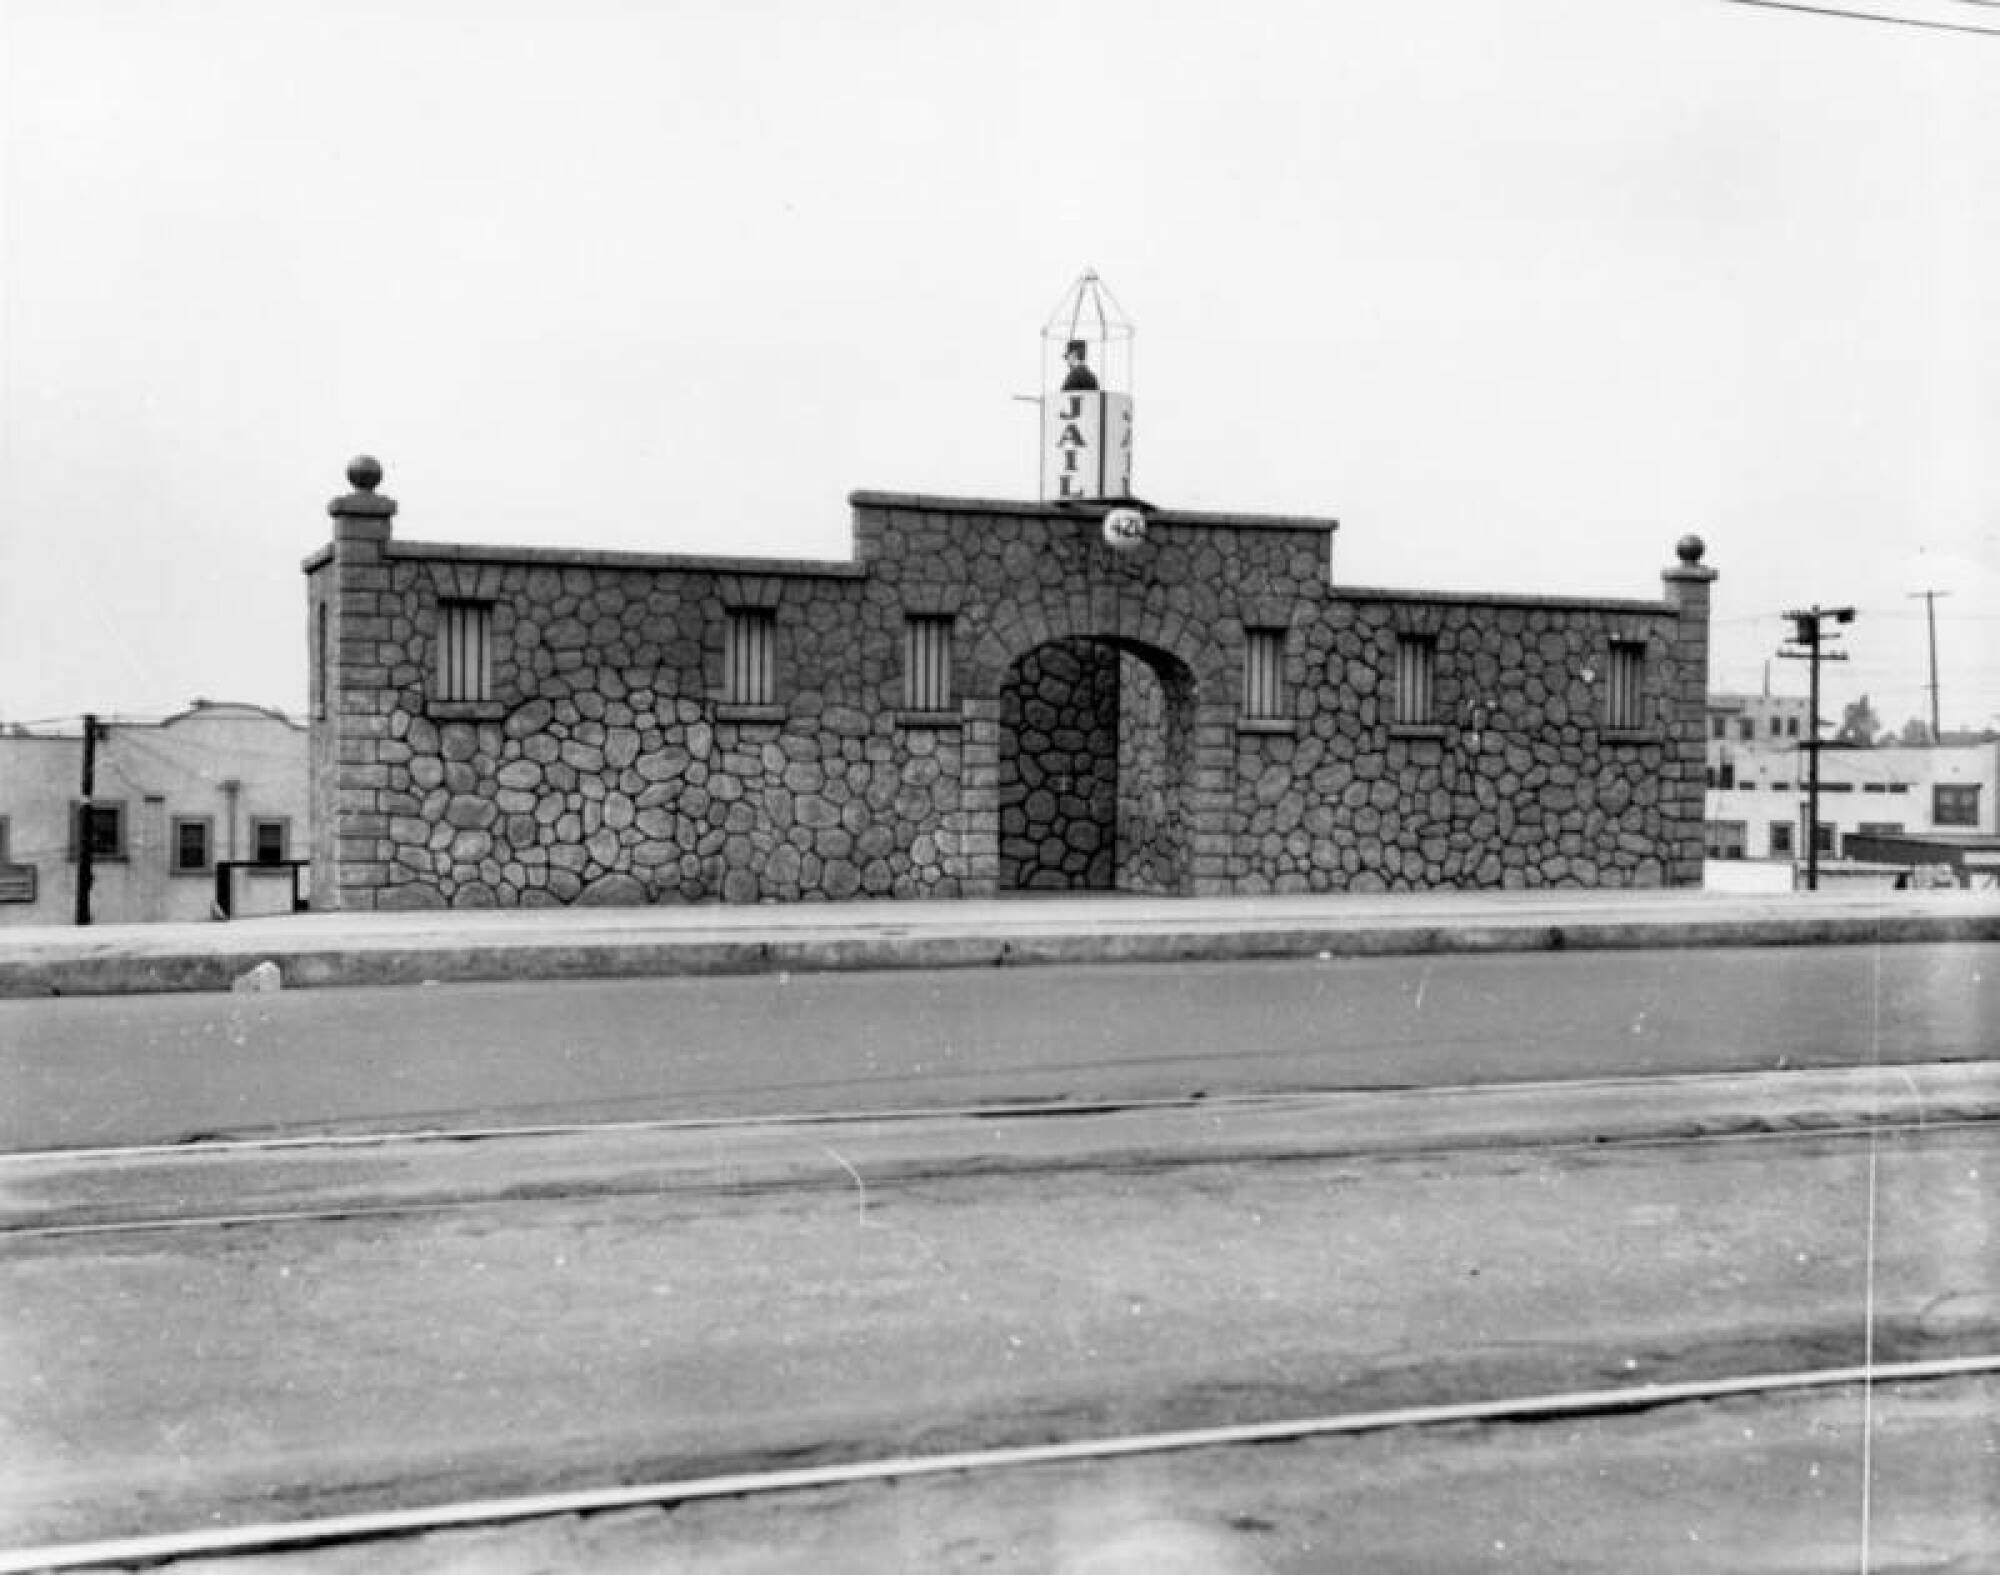 Exterior view of the Jail Cafe. A "jailer" watches from a guard tower on the roof.